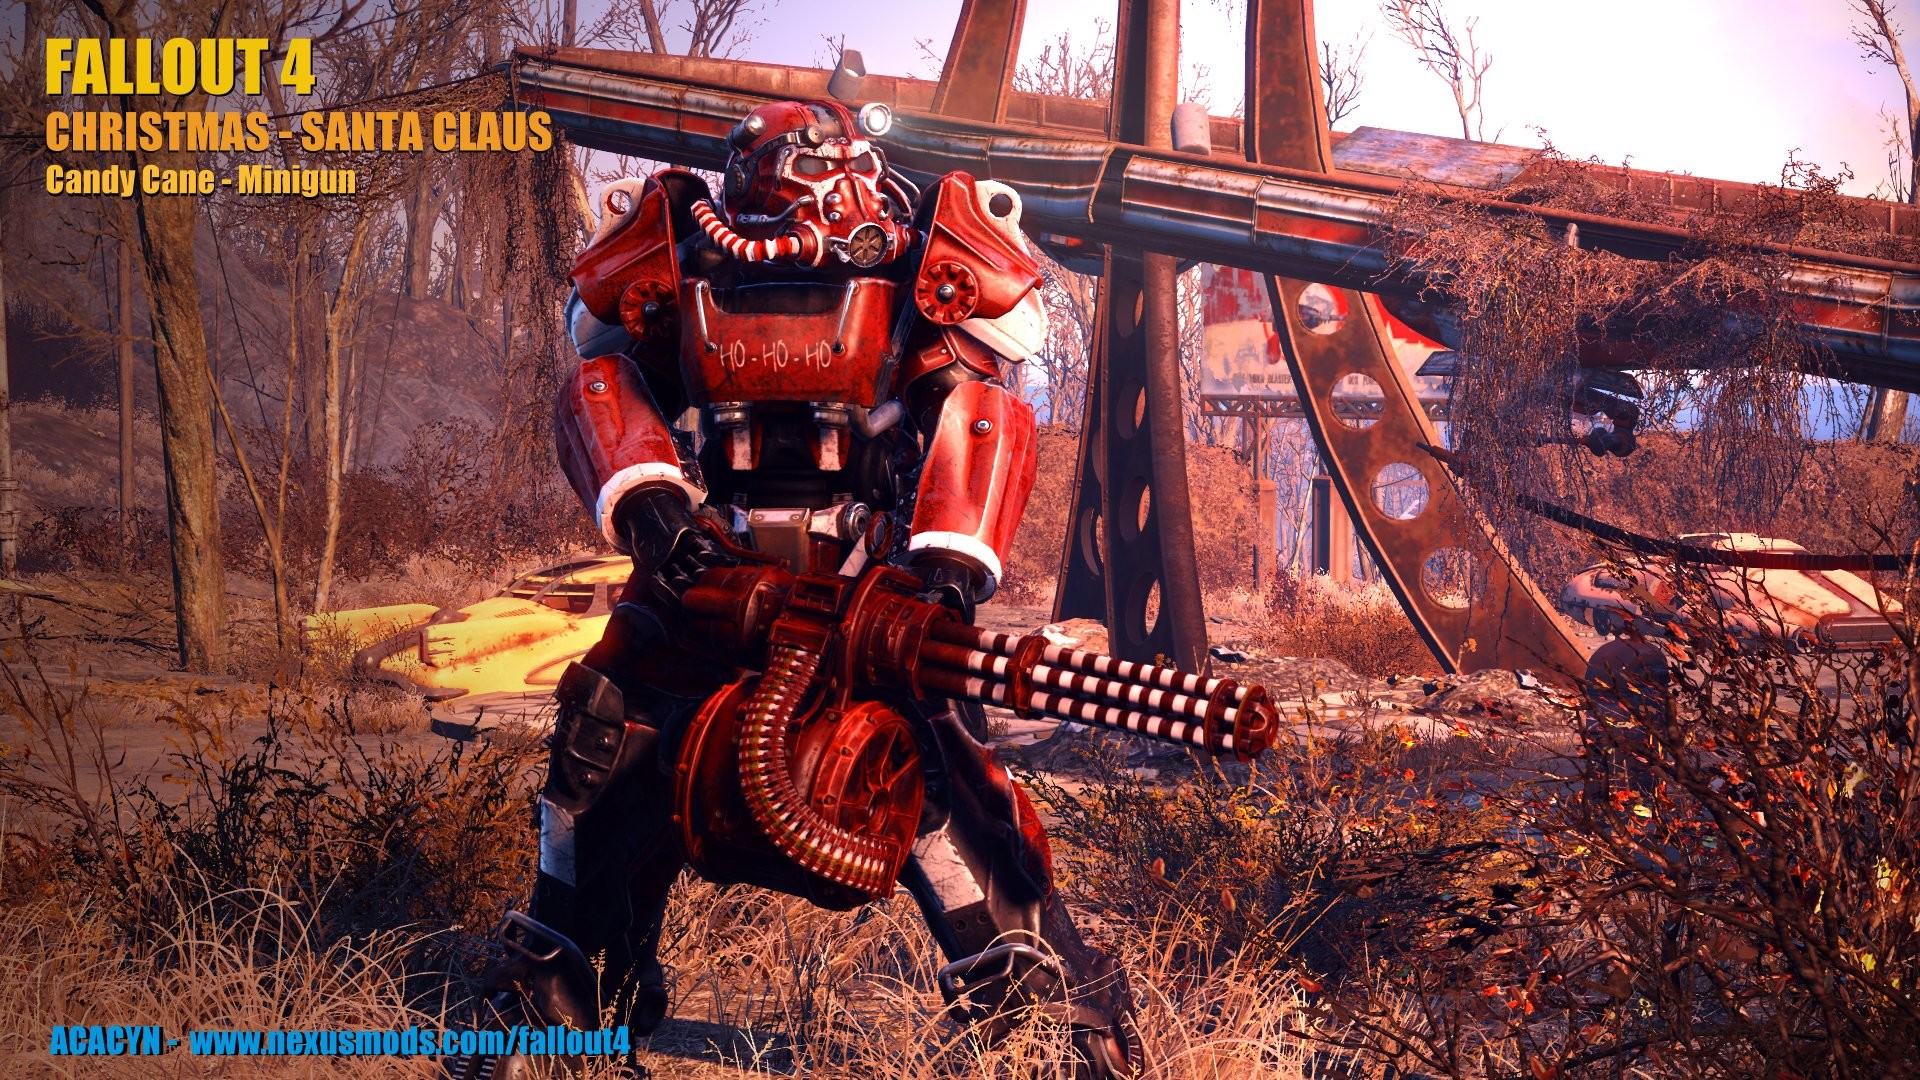 1920x1080 Christmas - Santa Claus Power Armor at Fallout 4 Nexus - Mods and community